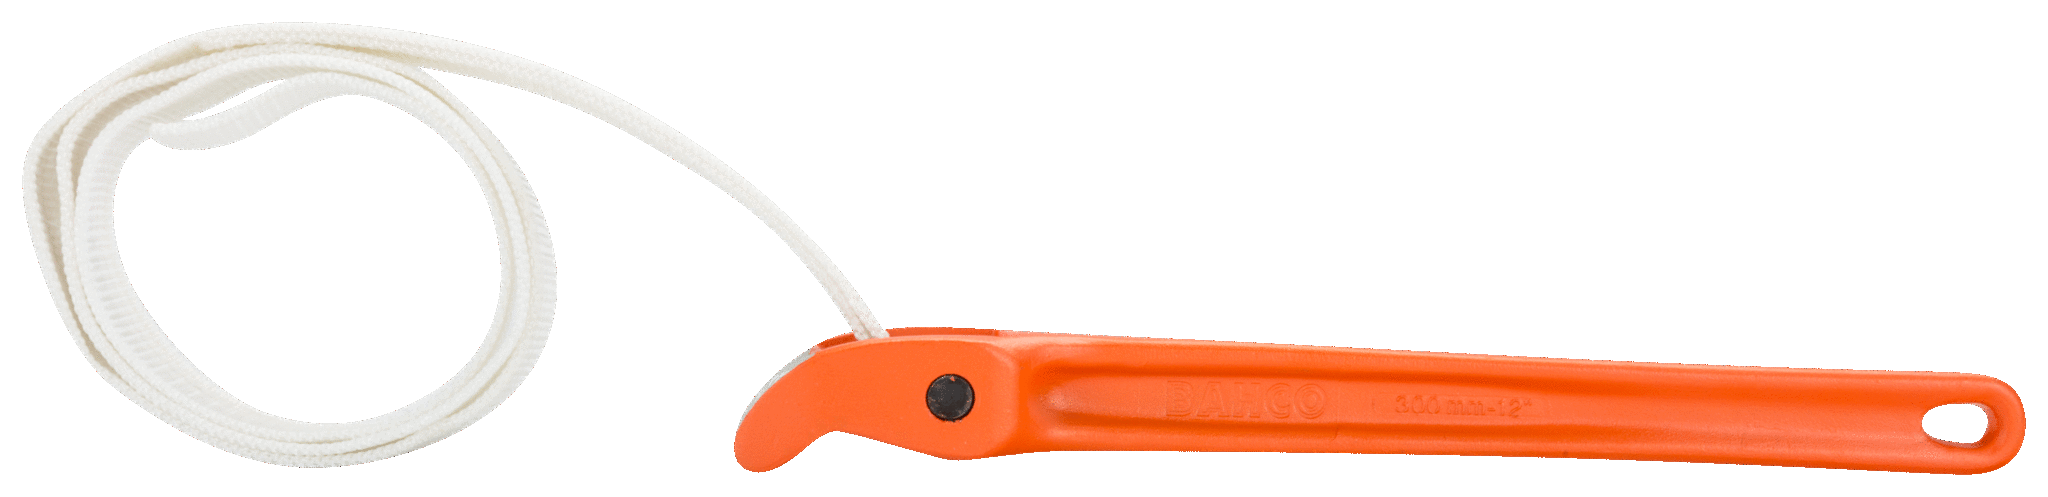 Special Pipe Wrenches with Nylon Strap and Steel Handle - 375-8 by Bahco